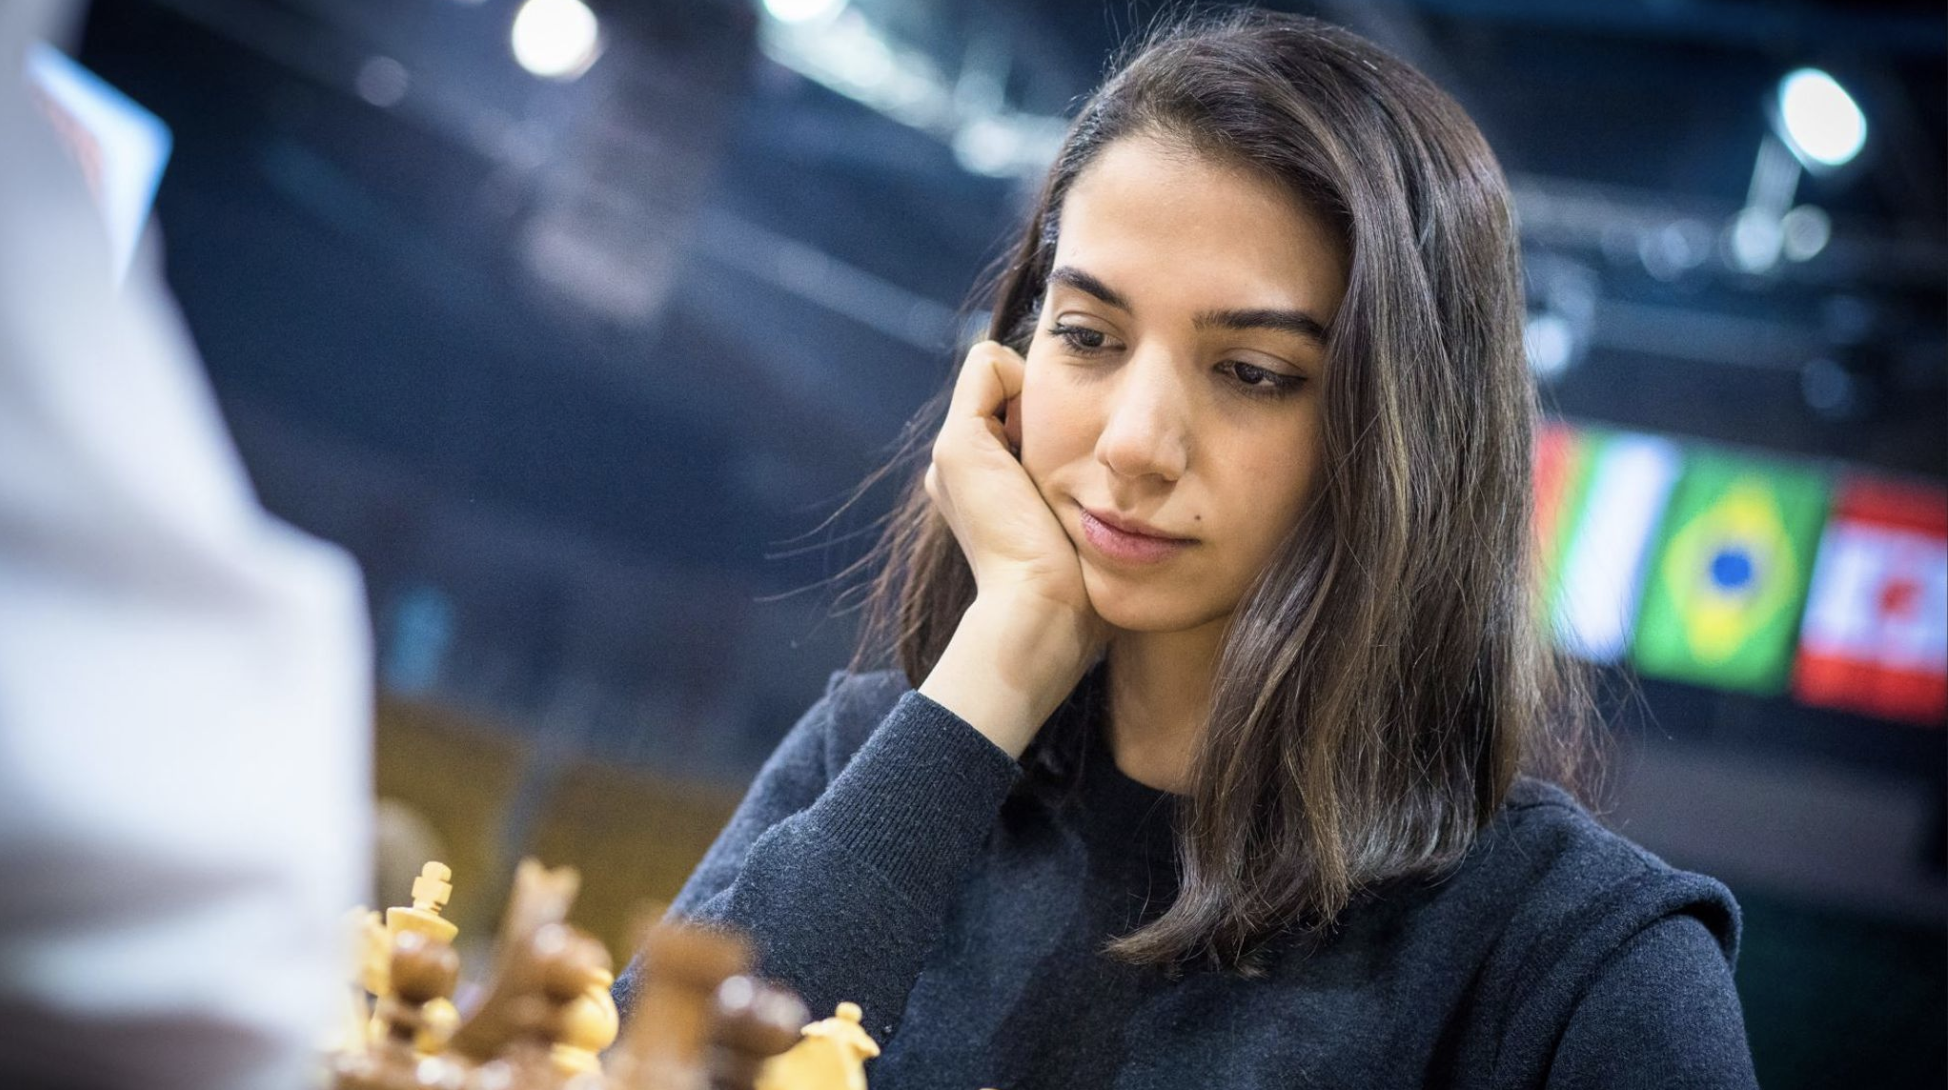 Iranian woman competes in international chess tournament without hijab |  The Times of Israel